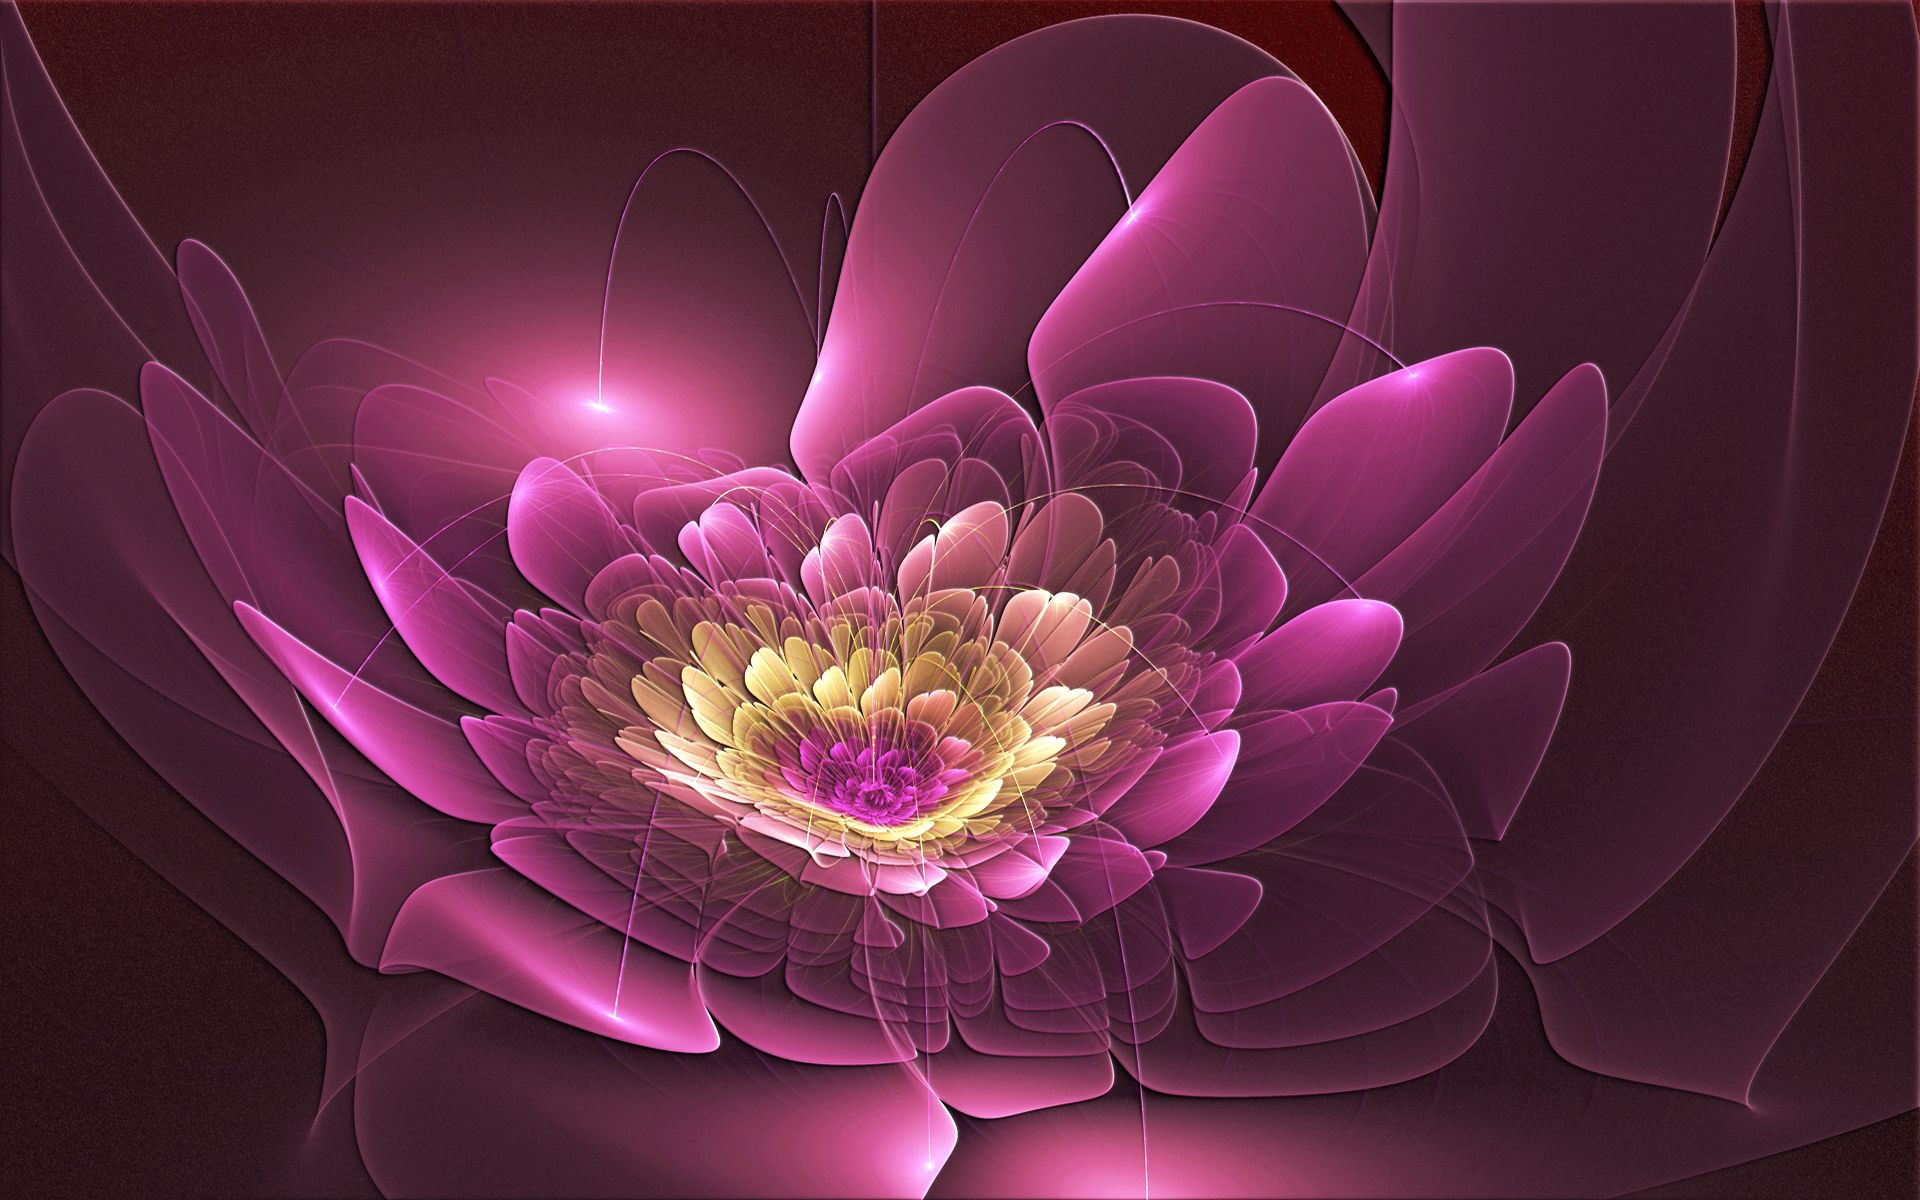 Windows Backgrounds fractal, abstract, pink, flower, form